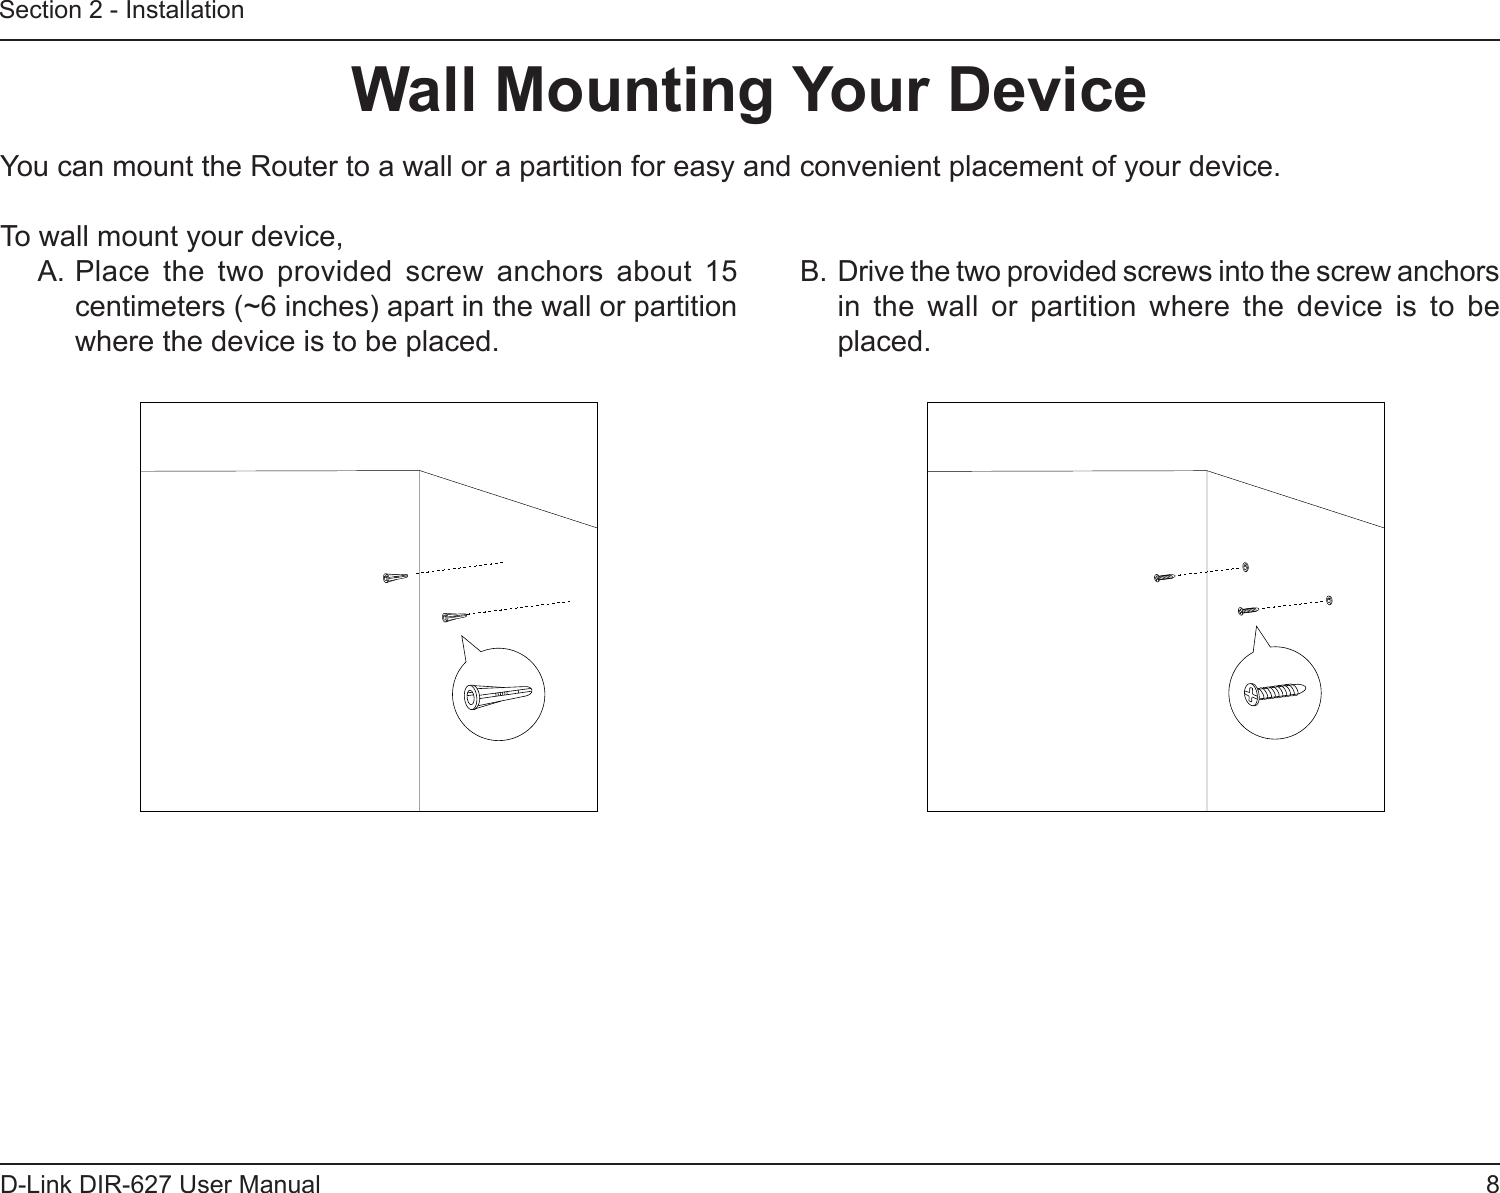 8D-Link DIR-627 User ManualSection 2 - InstallationWallMountingYourDeviceYou can mount the Router to a wall or a partition for easy and convenient placement of your device.To wall mount your device,A. Place  the  two  provided  screw  anchors  about  15 centimeters (~6 inches) apart in the wall or partition where the device is to be placed.B. Drive the two provided screws into the screw anchors in  the  wall  or  partition  where  the  device  is  to  be placed.